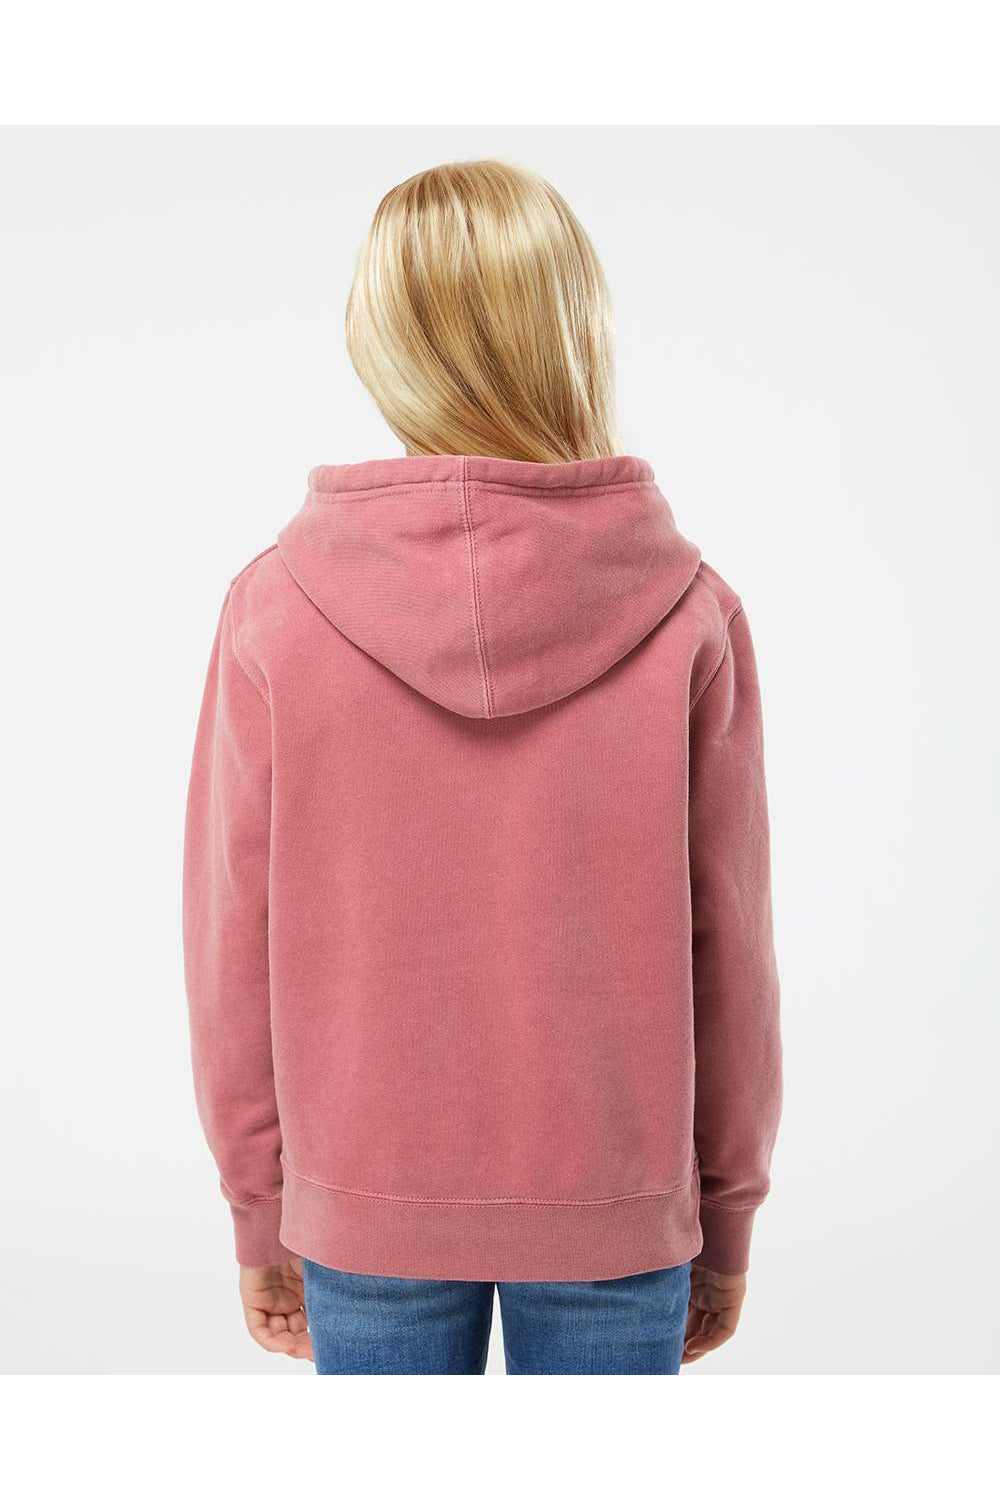 Independent Trading Co. PRM1500Y Youth Pigment Dyed Hooded Sweatshirt Hoodie Maroon Model Back